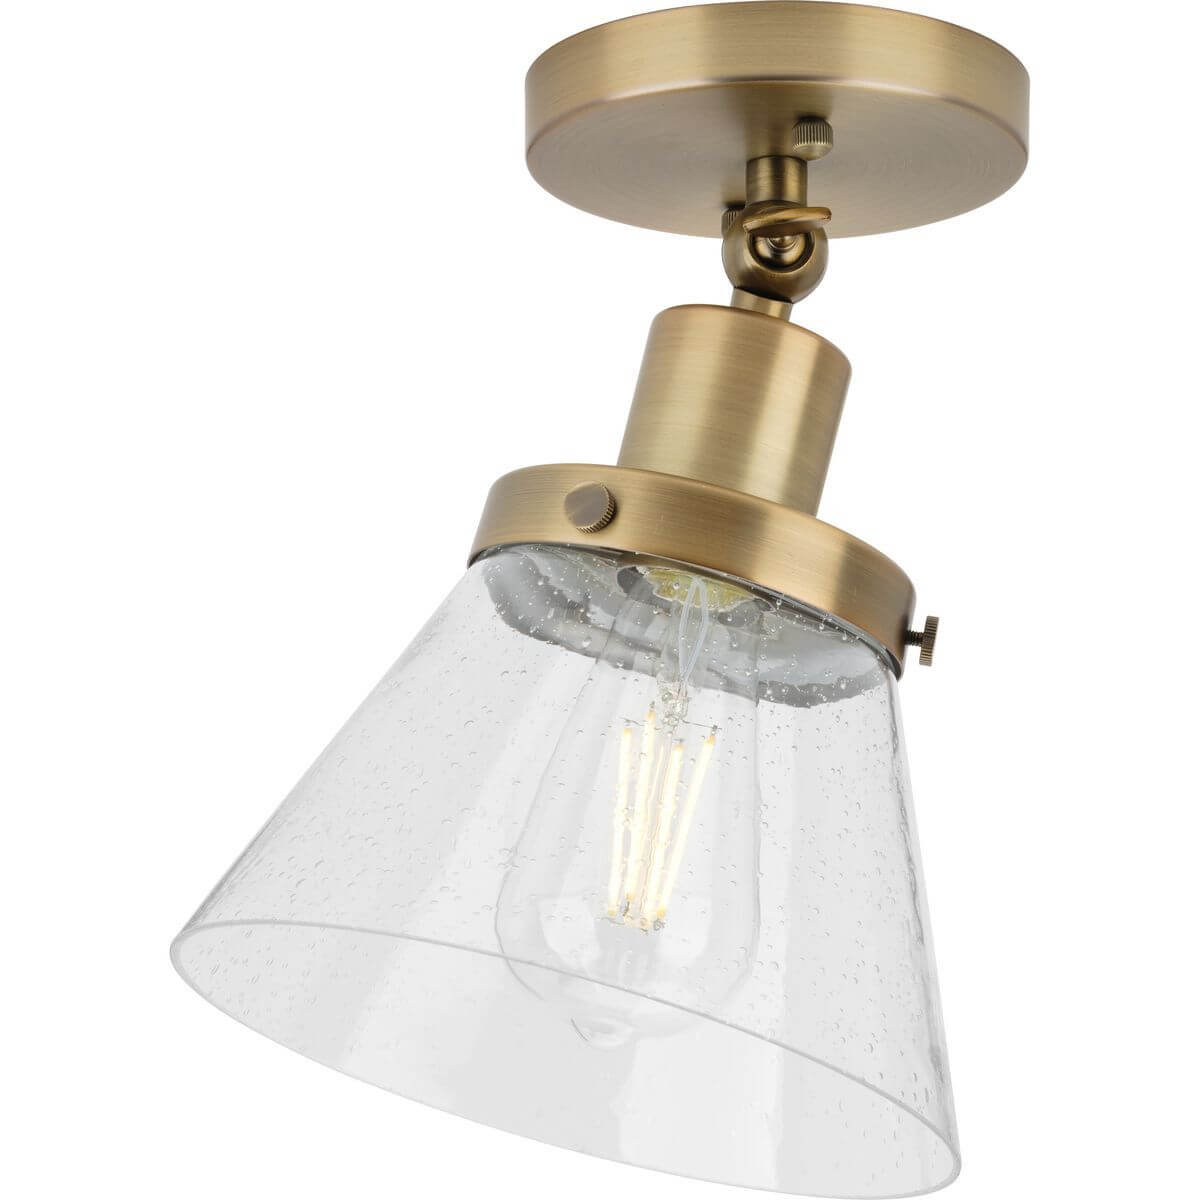 Progress Lighting Hinton 1 Light 8 inch Flush Mount in Vintage Brass with Clear Seeded Glass P350198-163